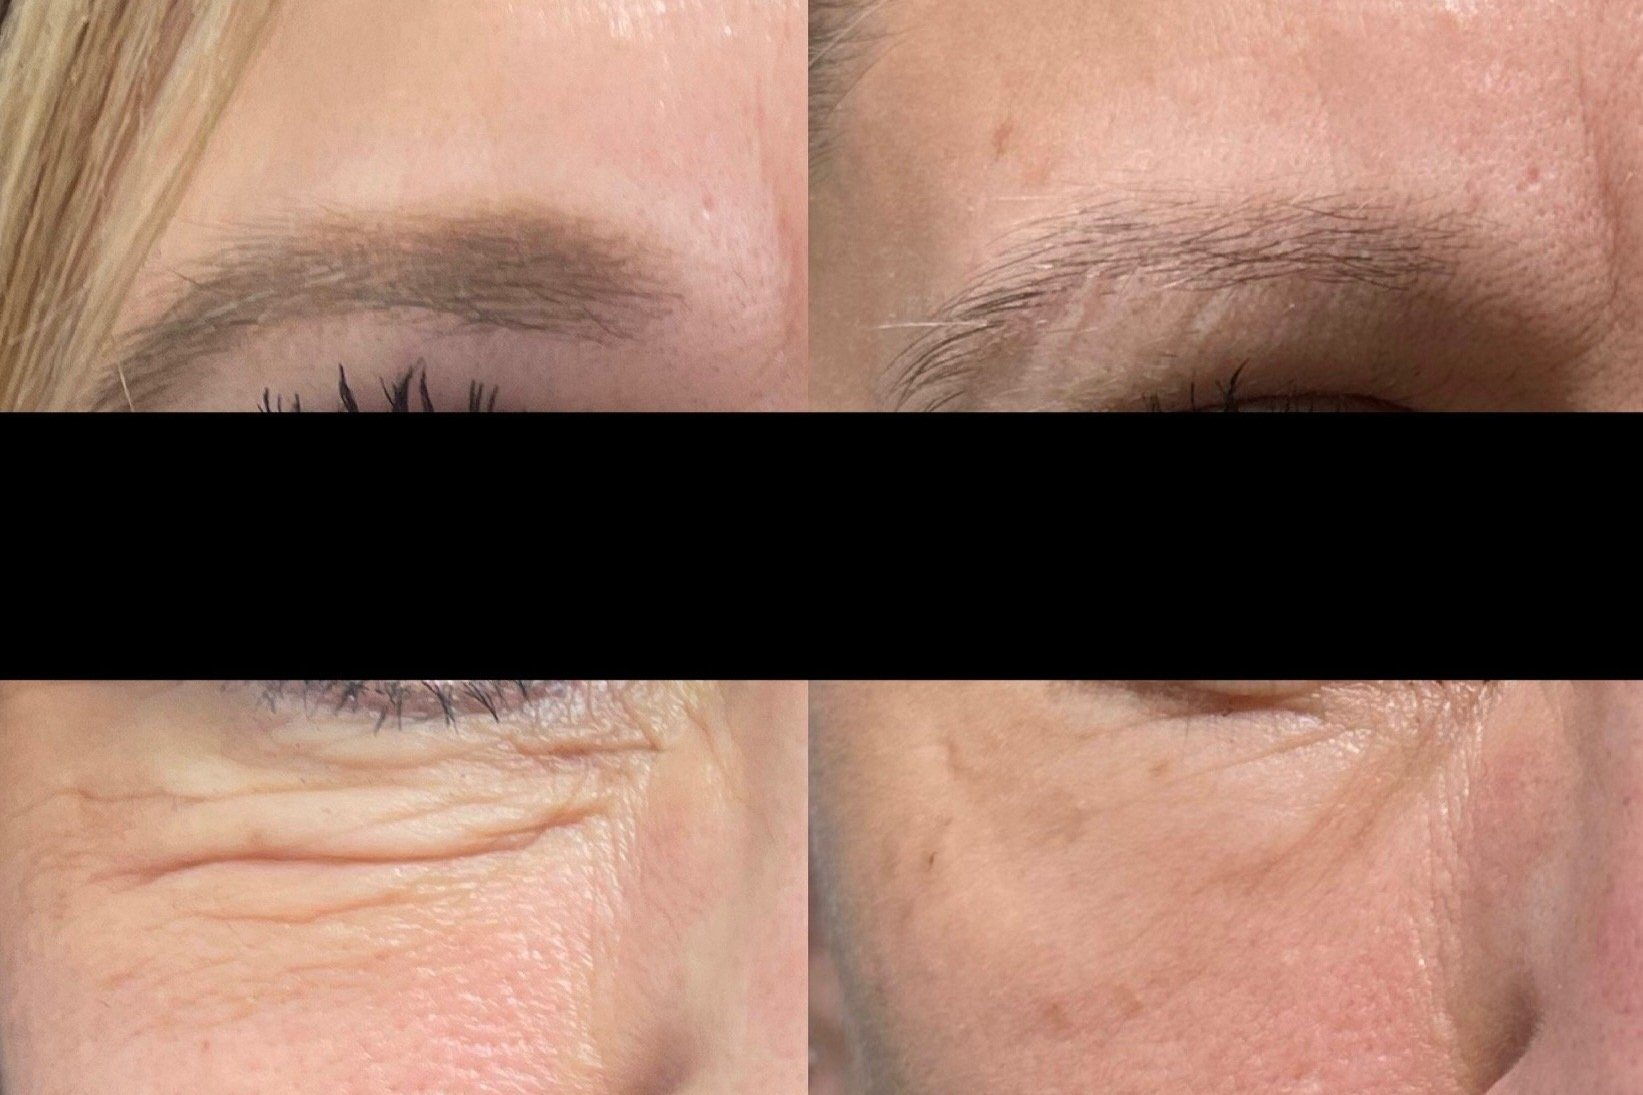 Morpheus8 beofre and after for undereye bags